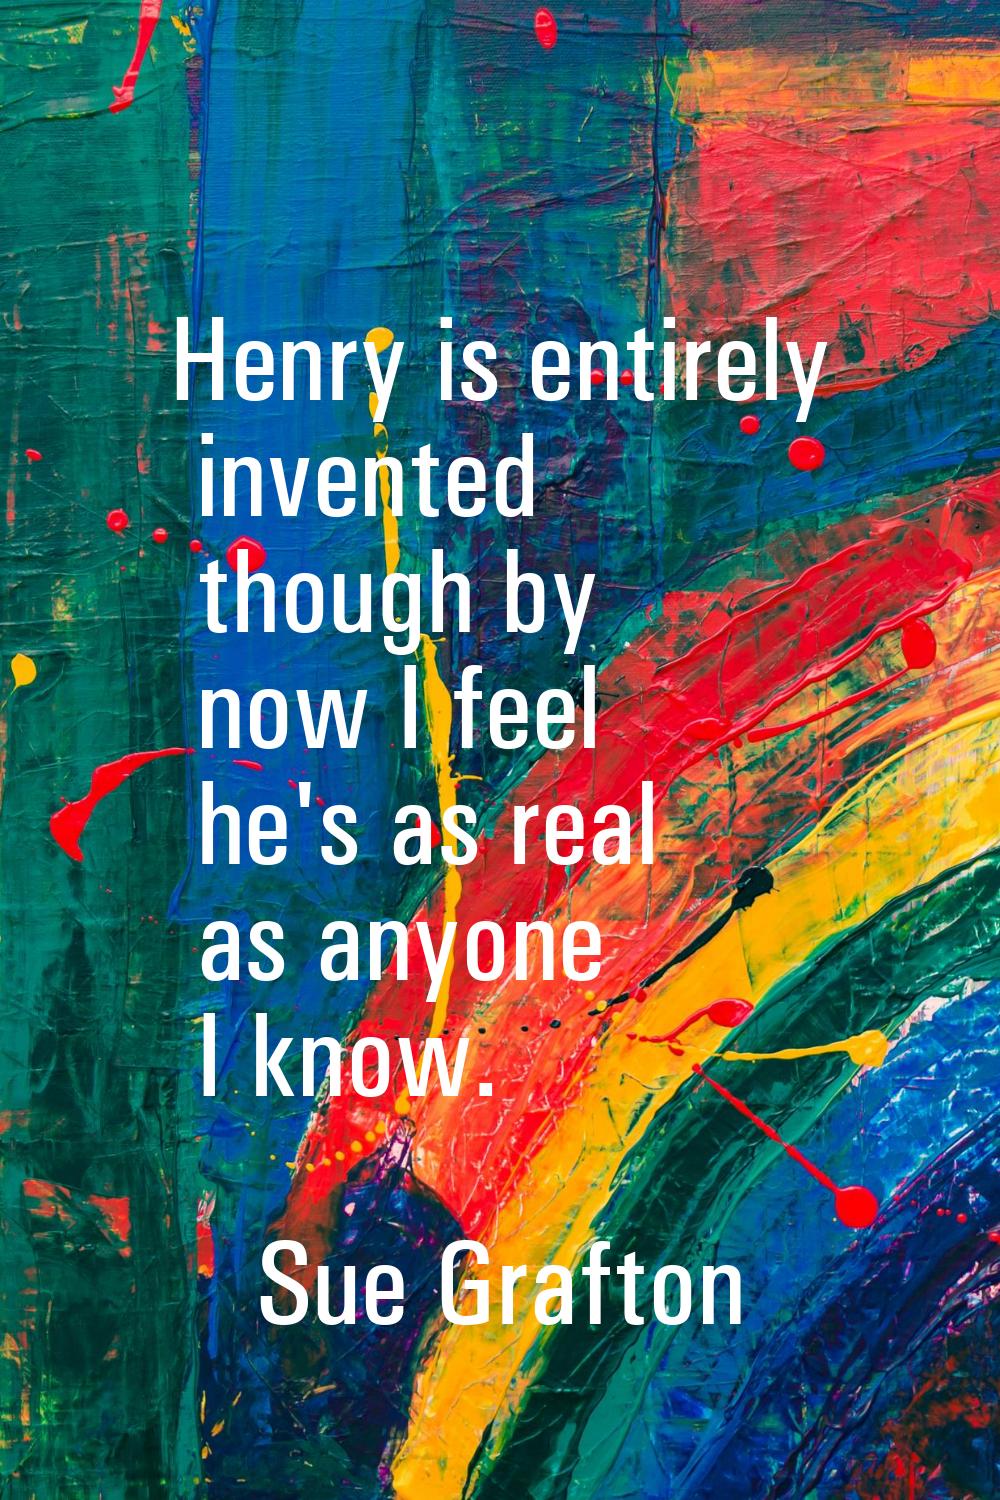 Henry is entirely invented though by now I feel he's as real as anyone I know.